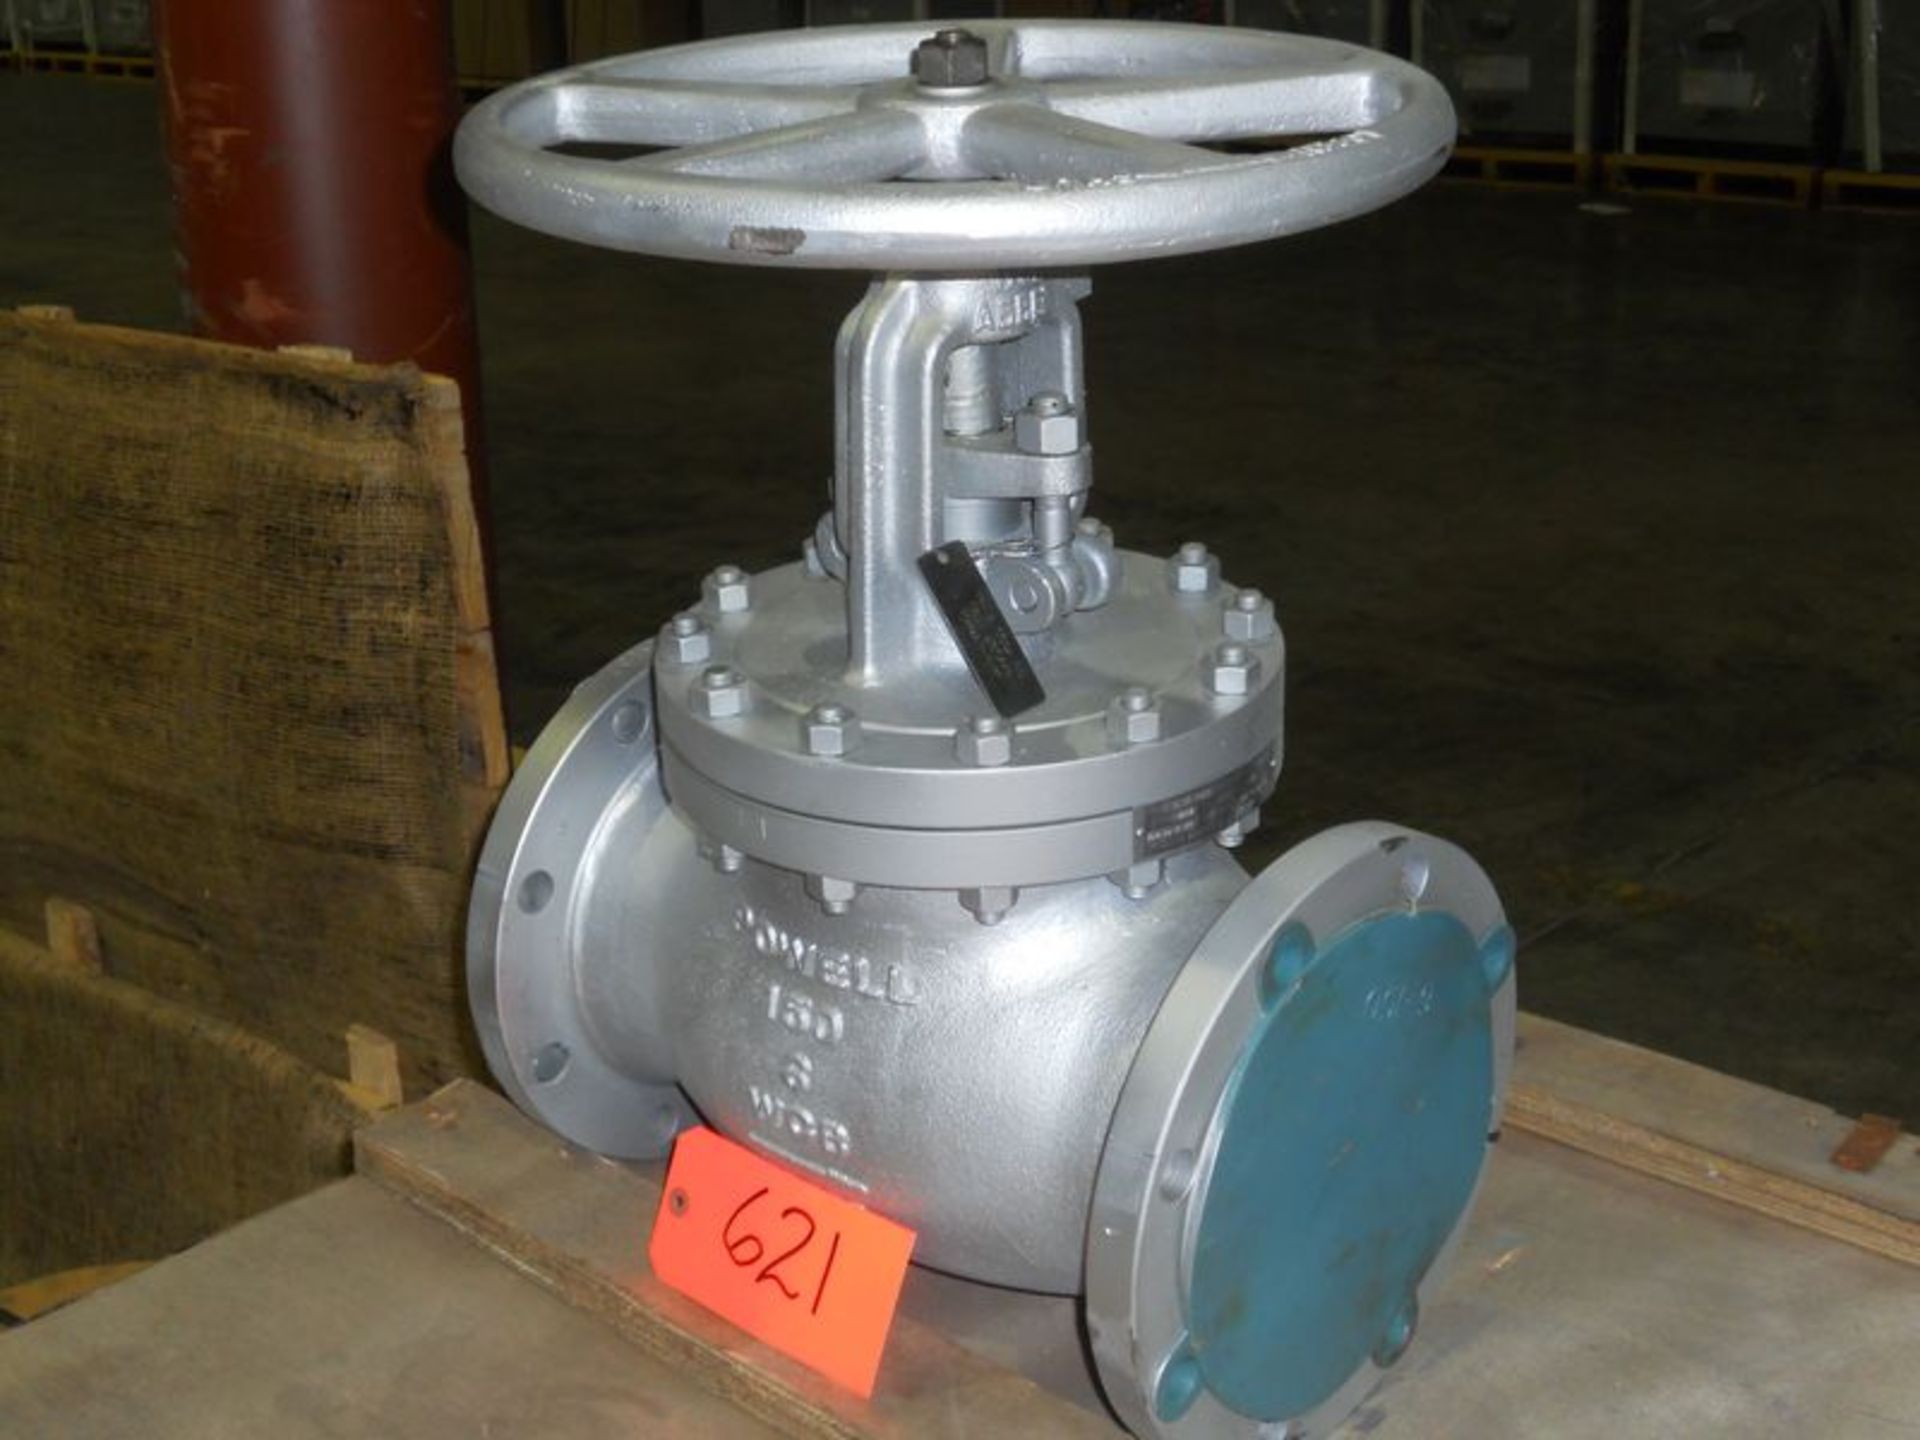 Lot (13) Powell WCB Series gate valves, (7) 6", (6) 4" stainless, 285 psi at 100F, Asset# 5160442 - Image 2 of 2